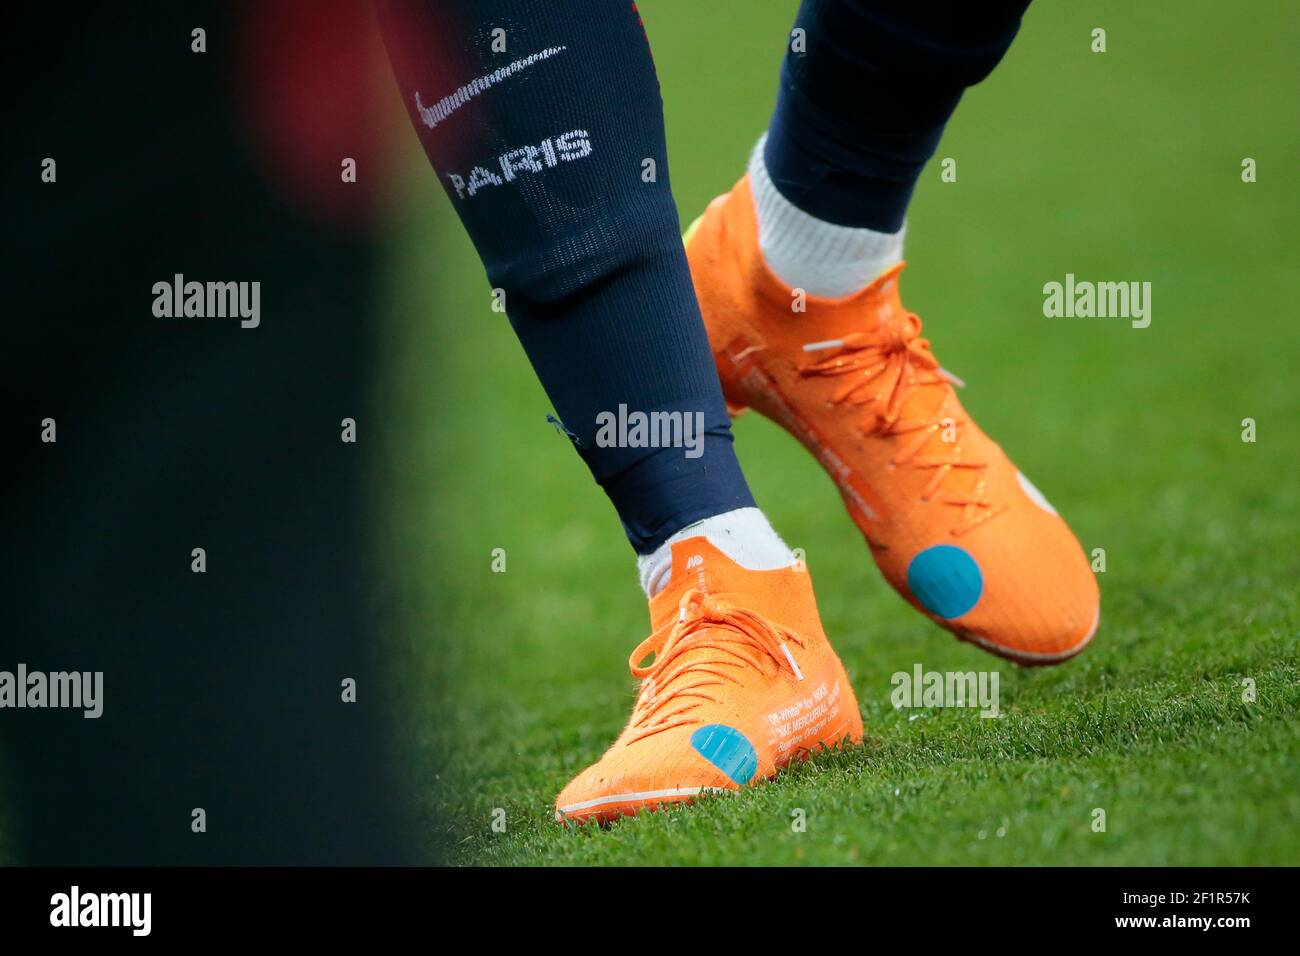 Psg Nike High Resolution Stock Photography and Images - Alamy